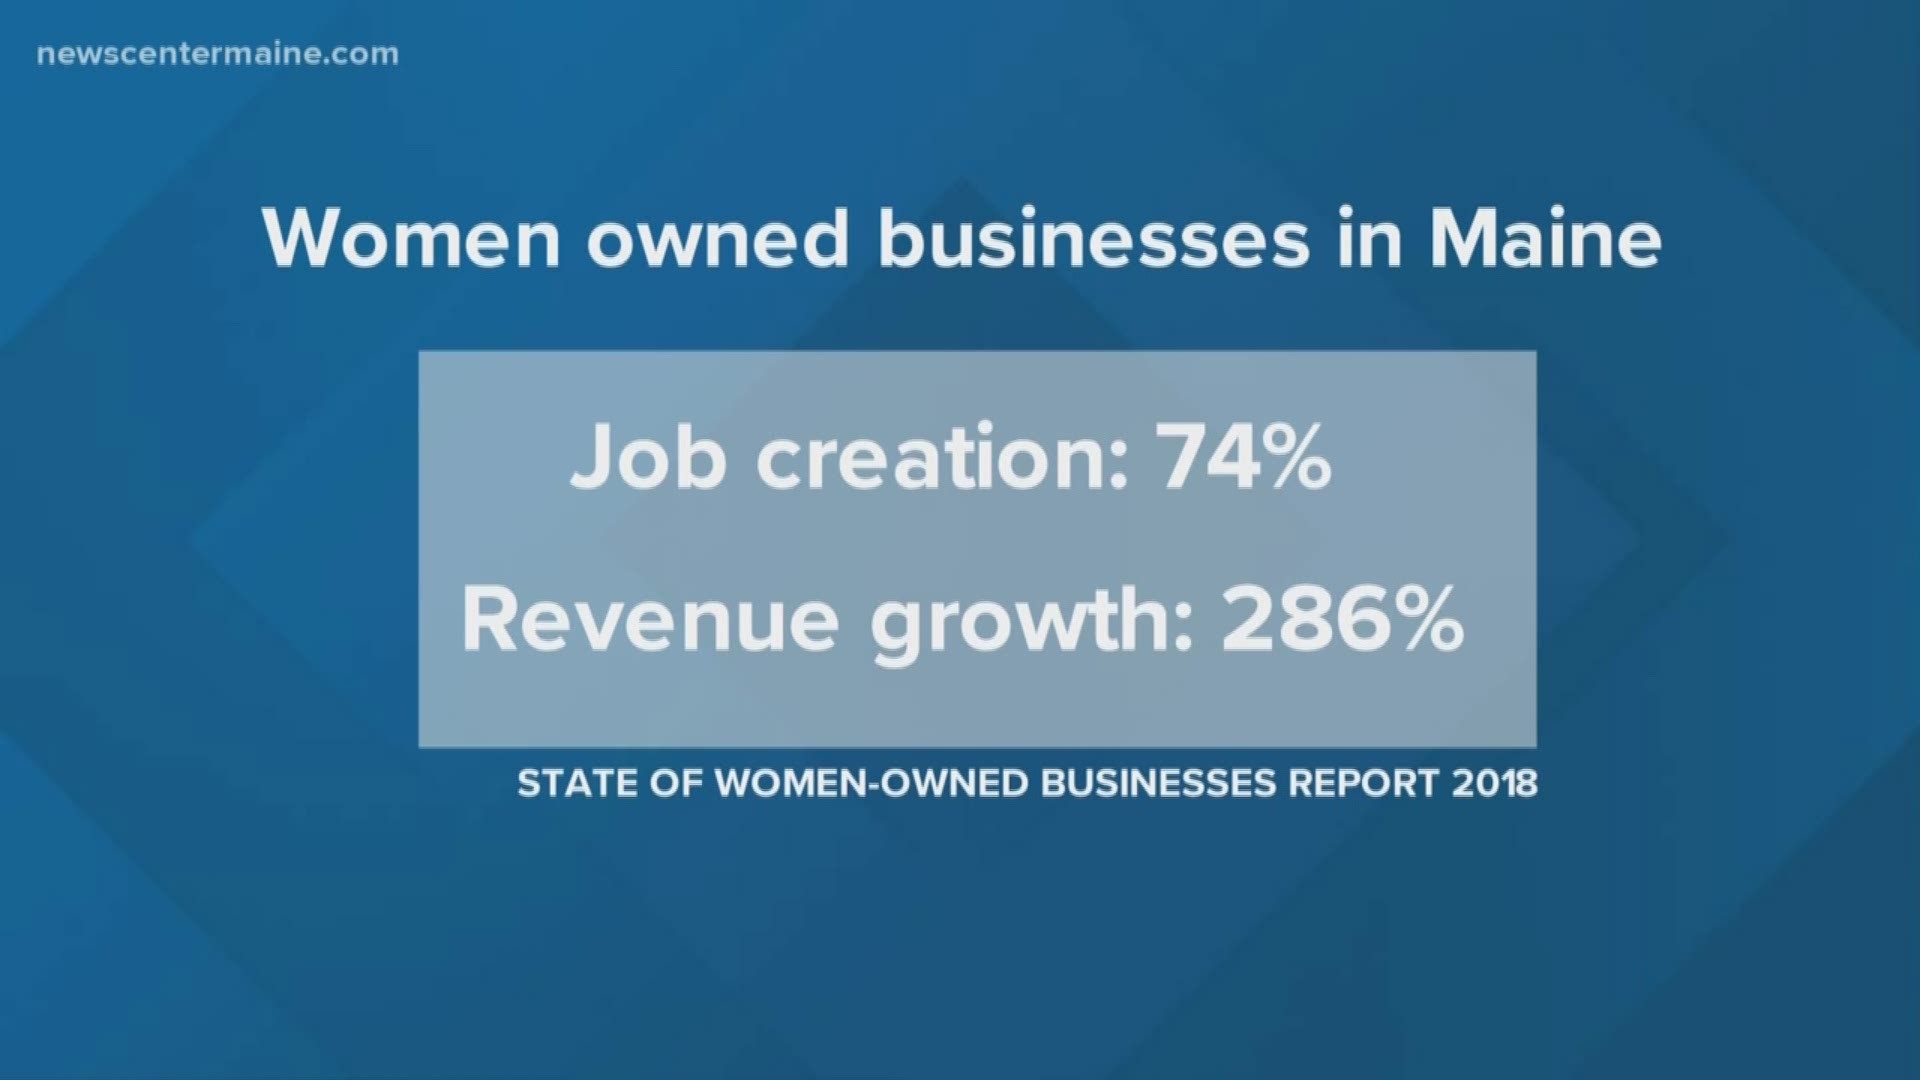 NOW: Maine women-owned businesses leading job creation, revenue growth